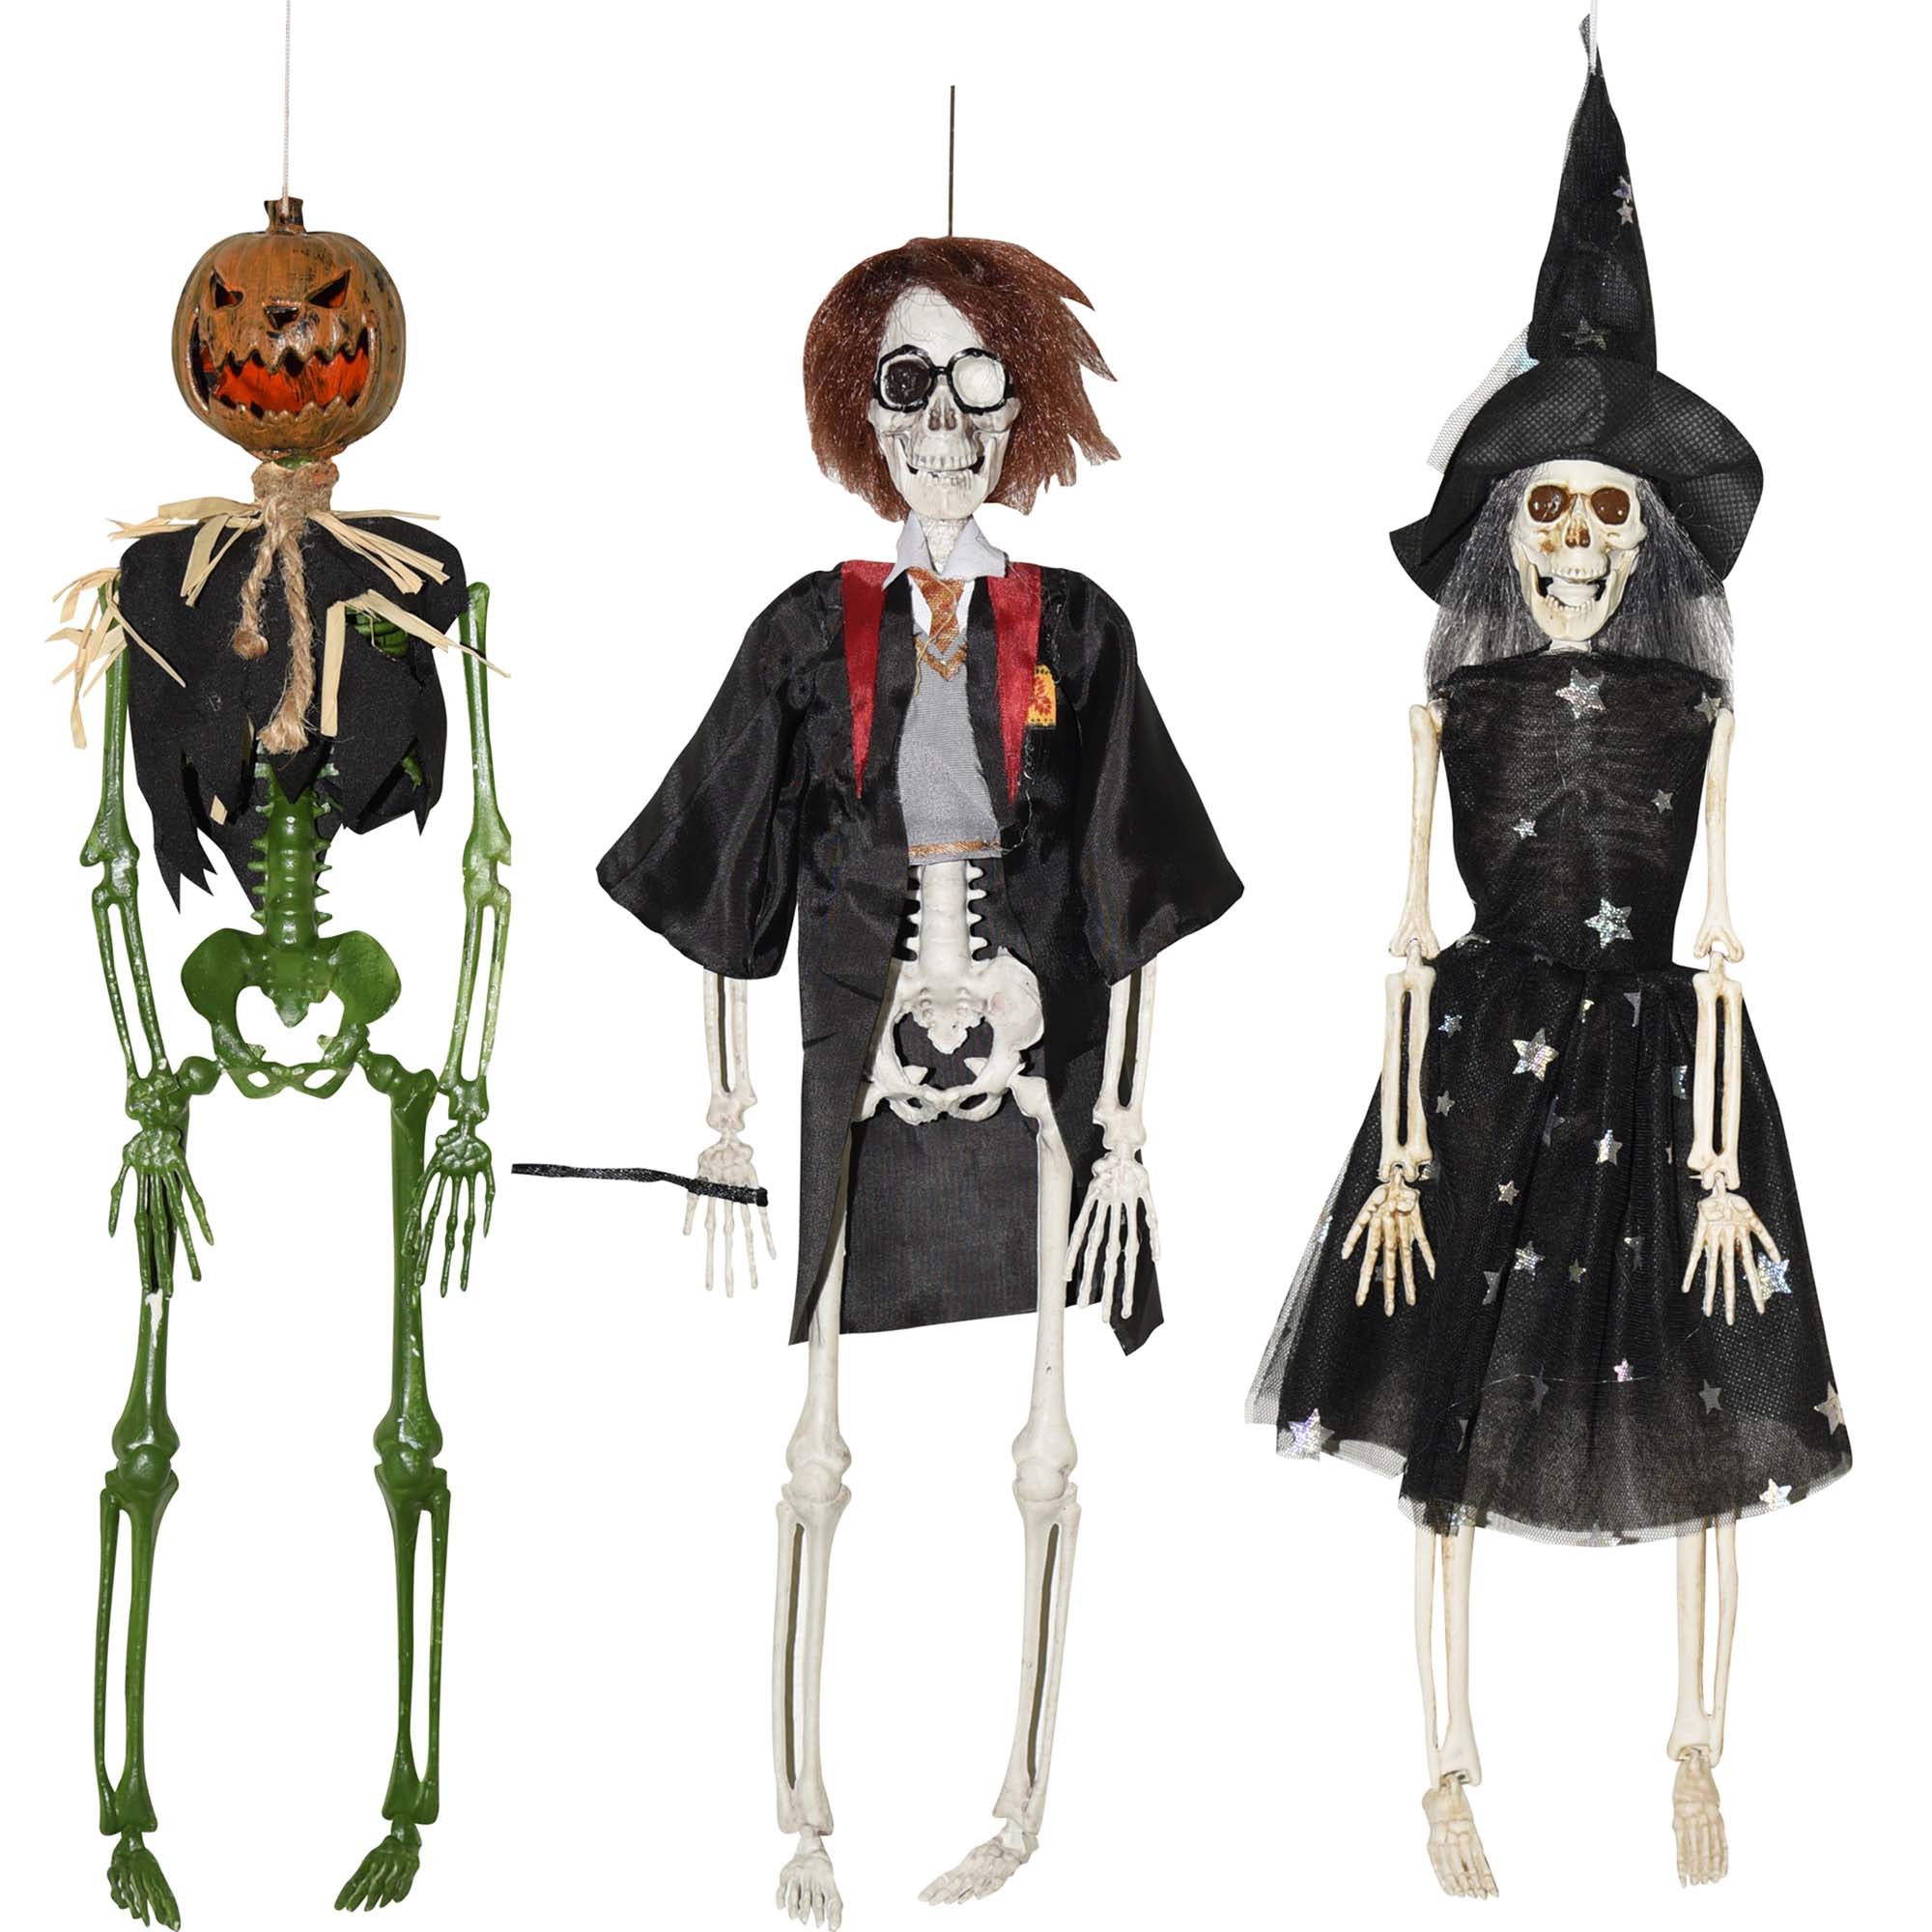 Skeleton, 16 Inches, Assortment, 1 Count